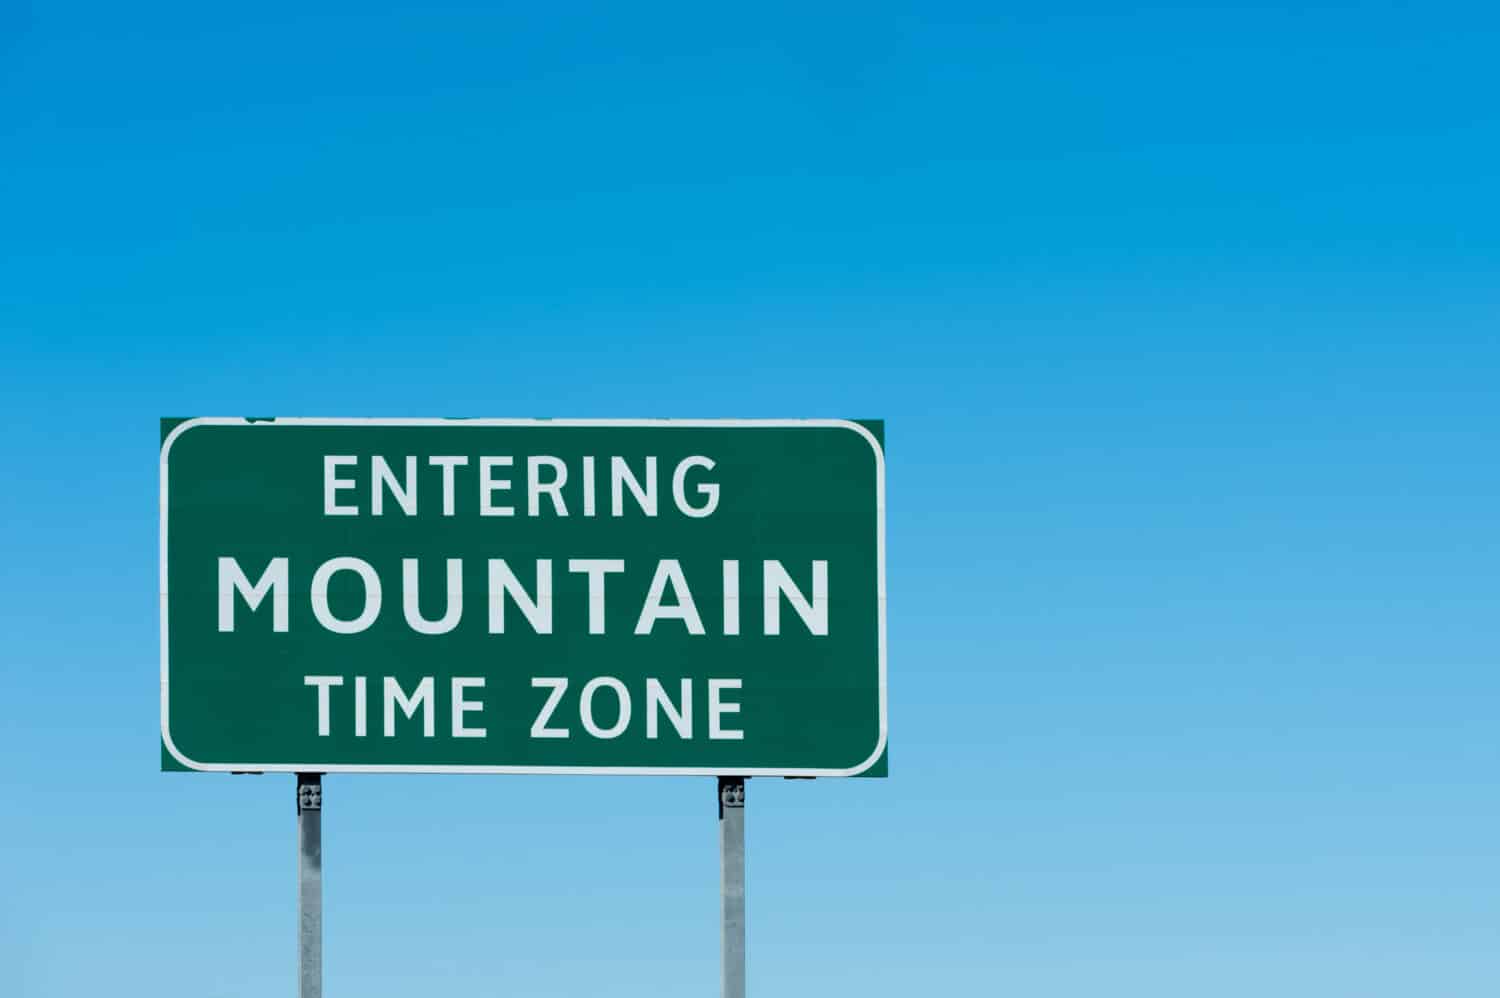 Road sign with Mountain time zone, New Mexico